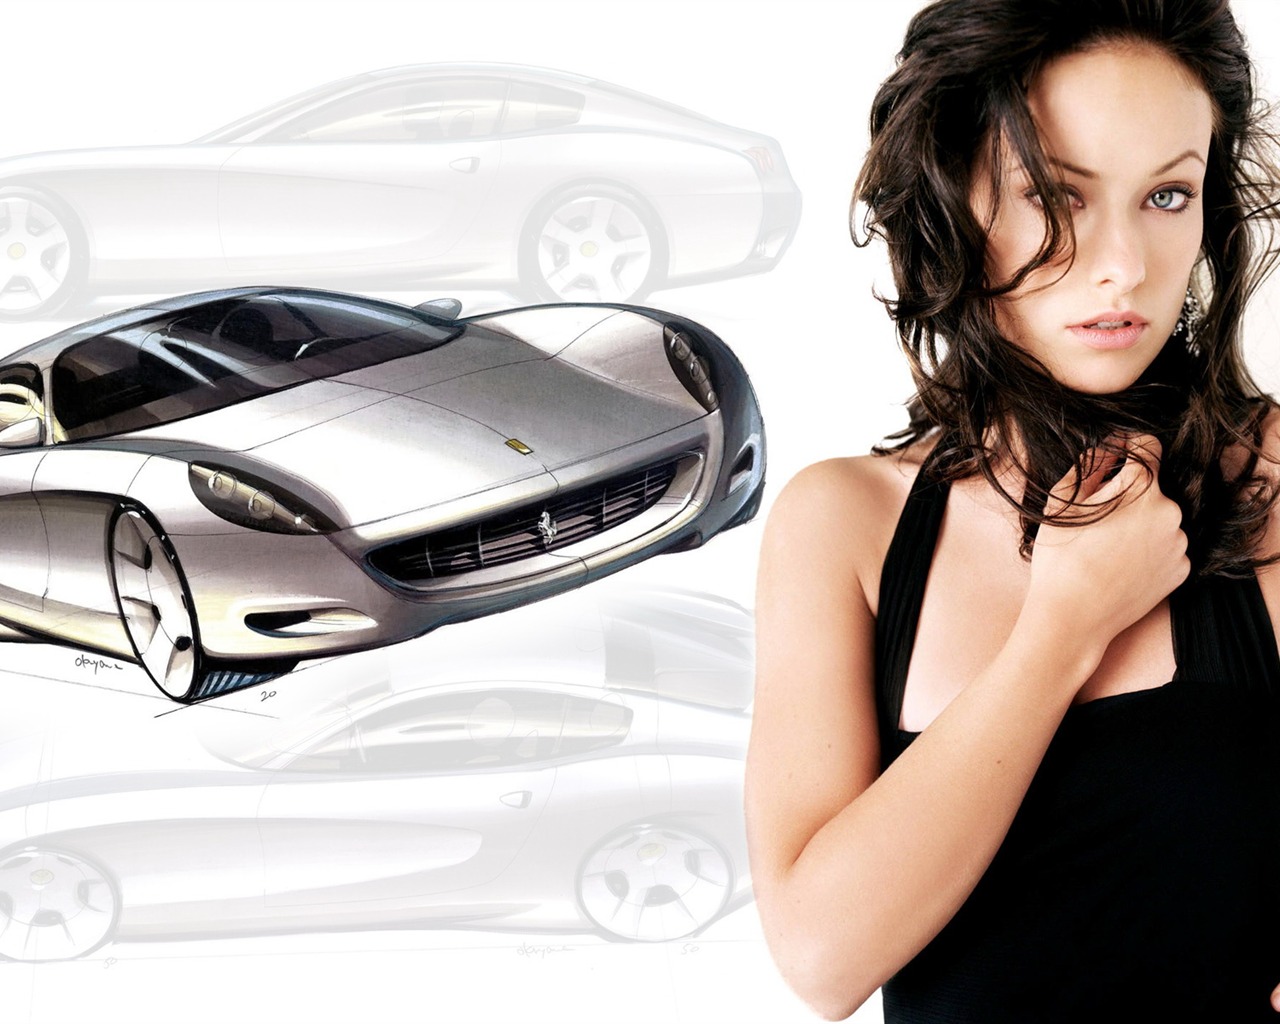 Cars and Girls wallpapers (2) #15 - 1280x1024